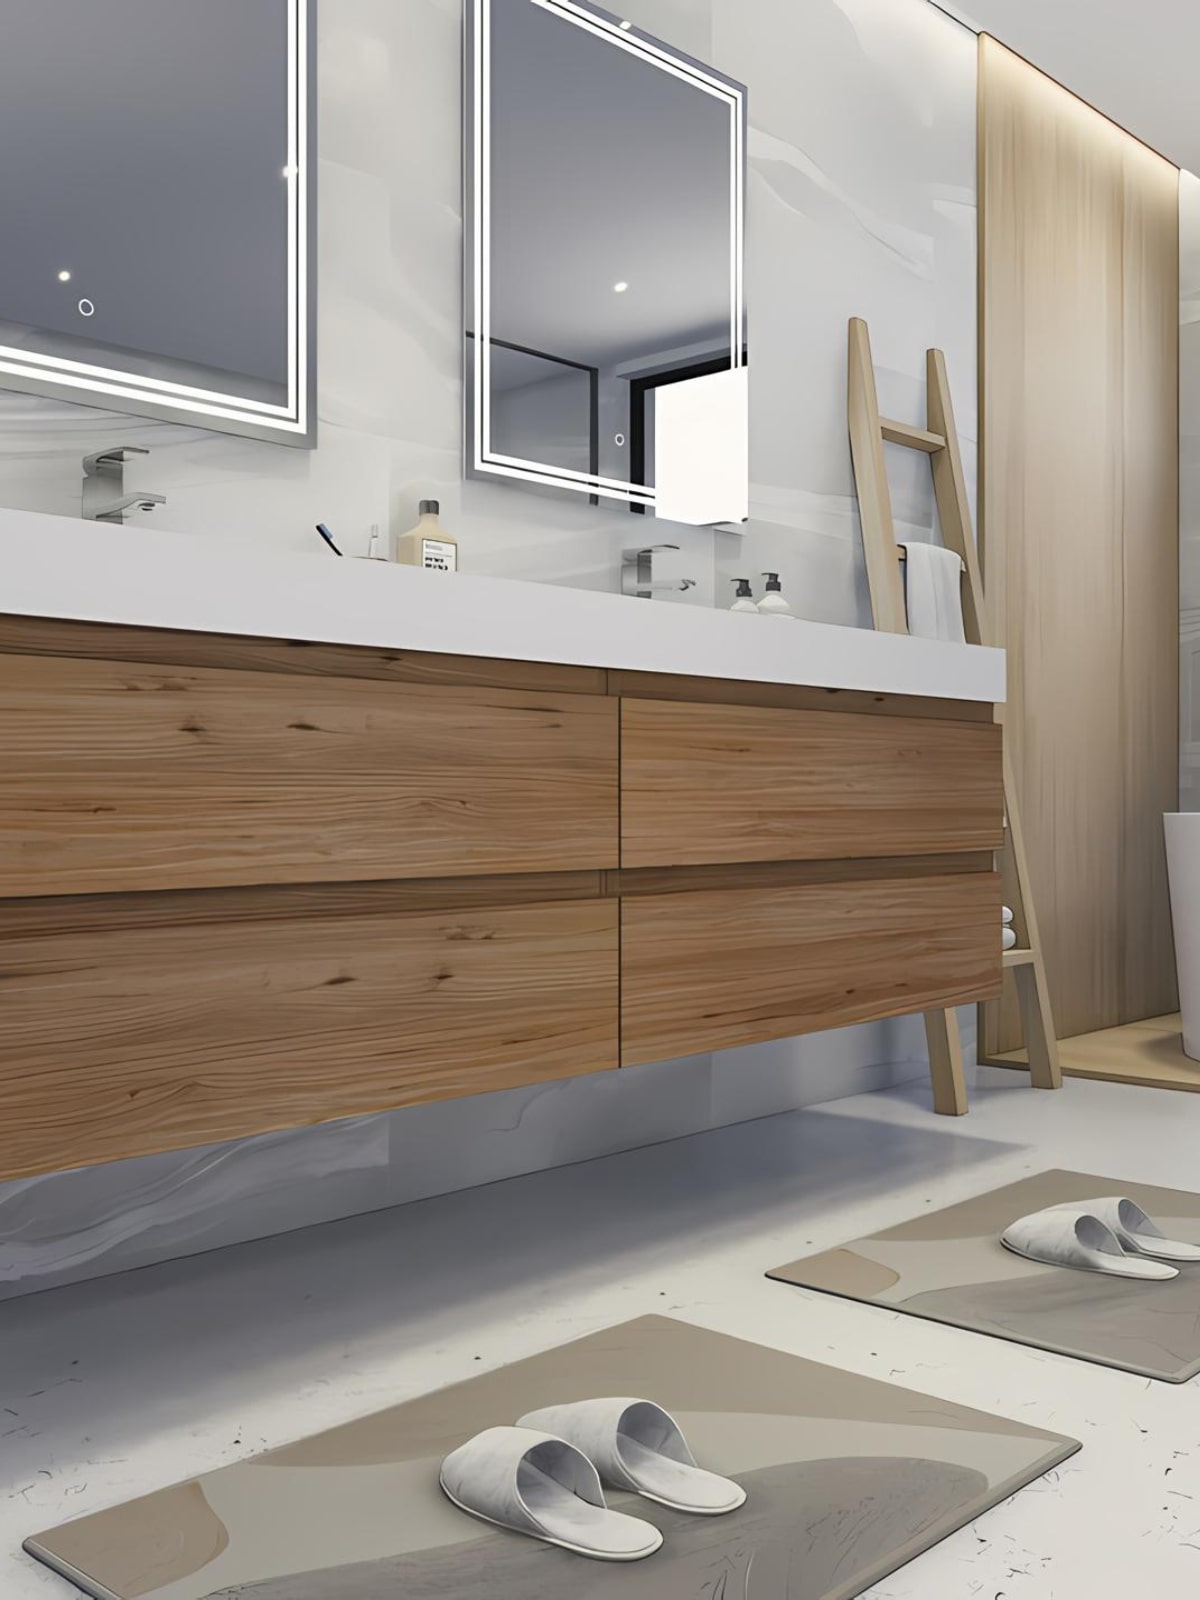 Wooden floating vanities add a natural clean aesthetic with plenty of storage and space. 